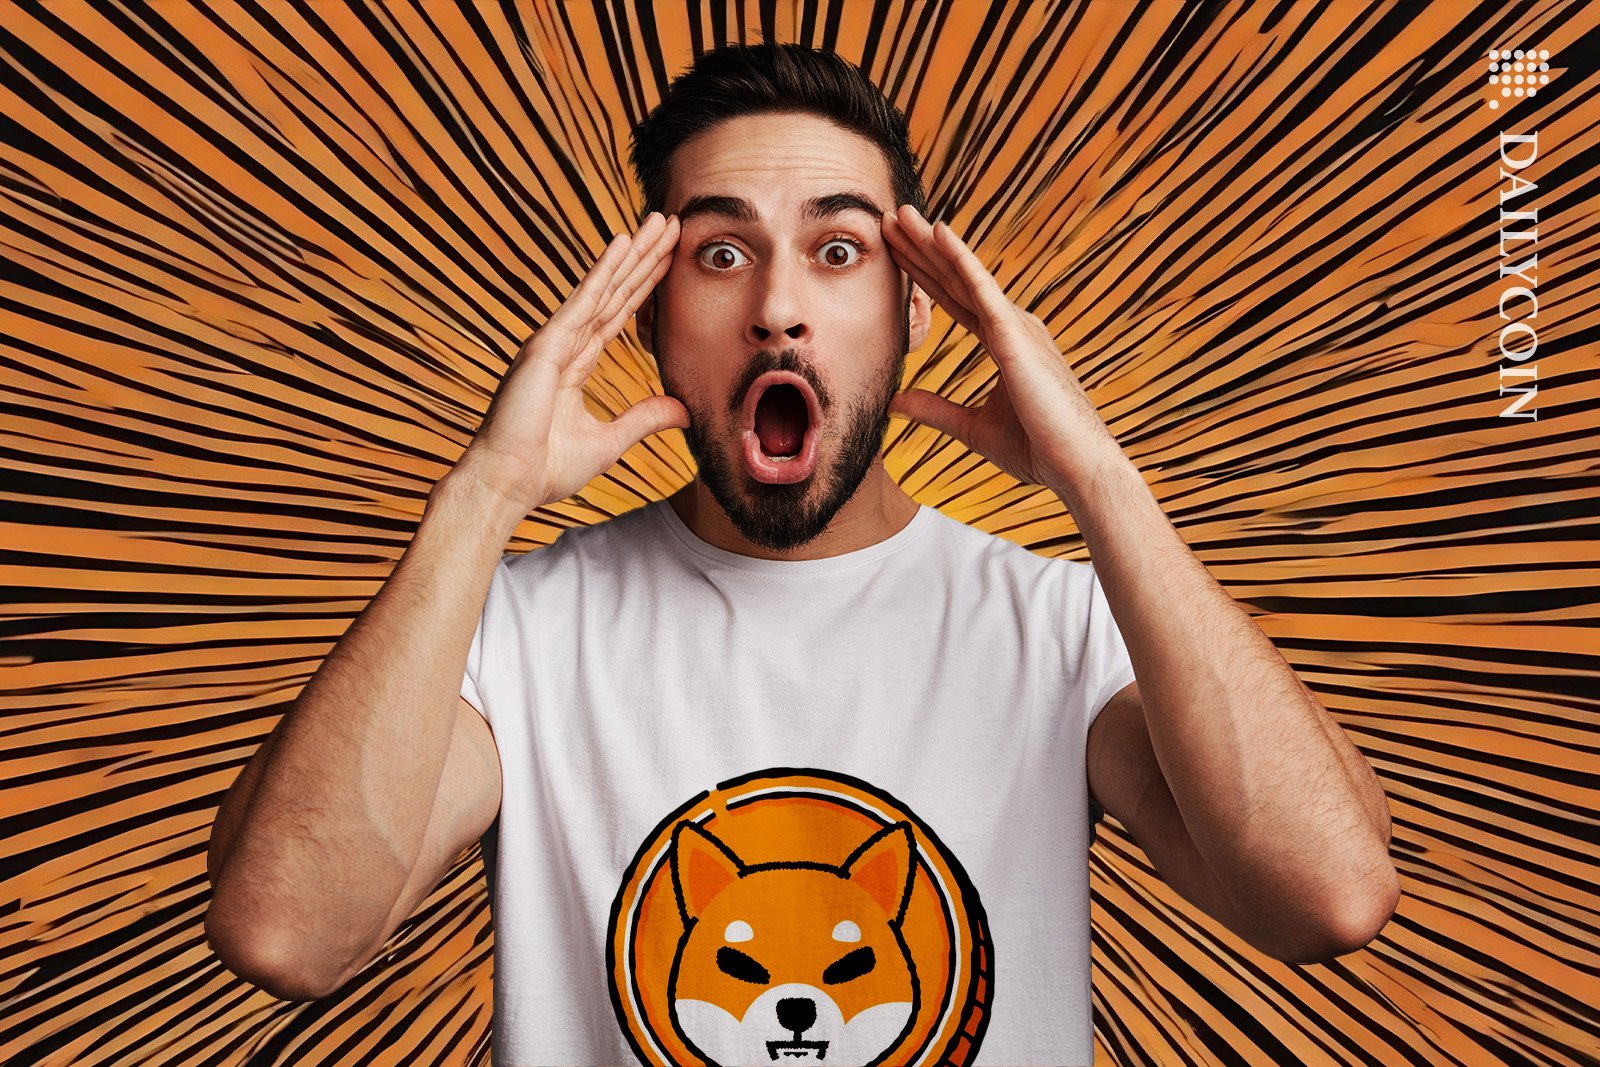 Man is shocked with whats happening with Shib token.